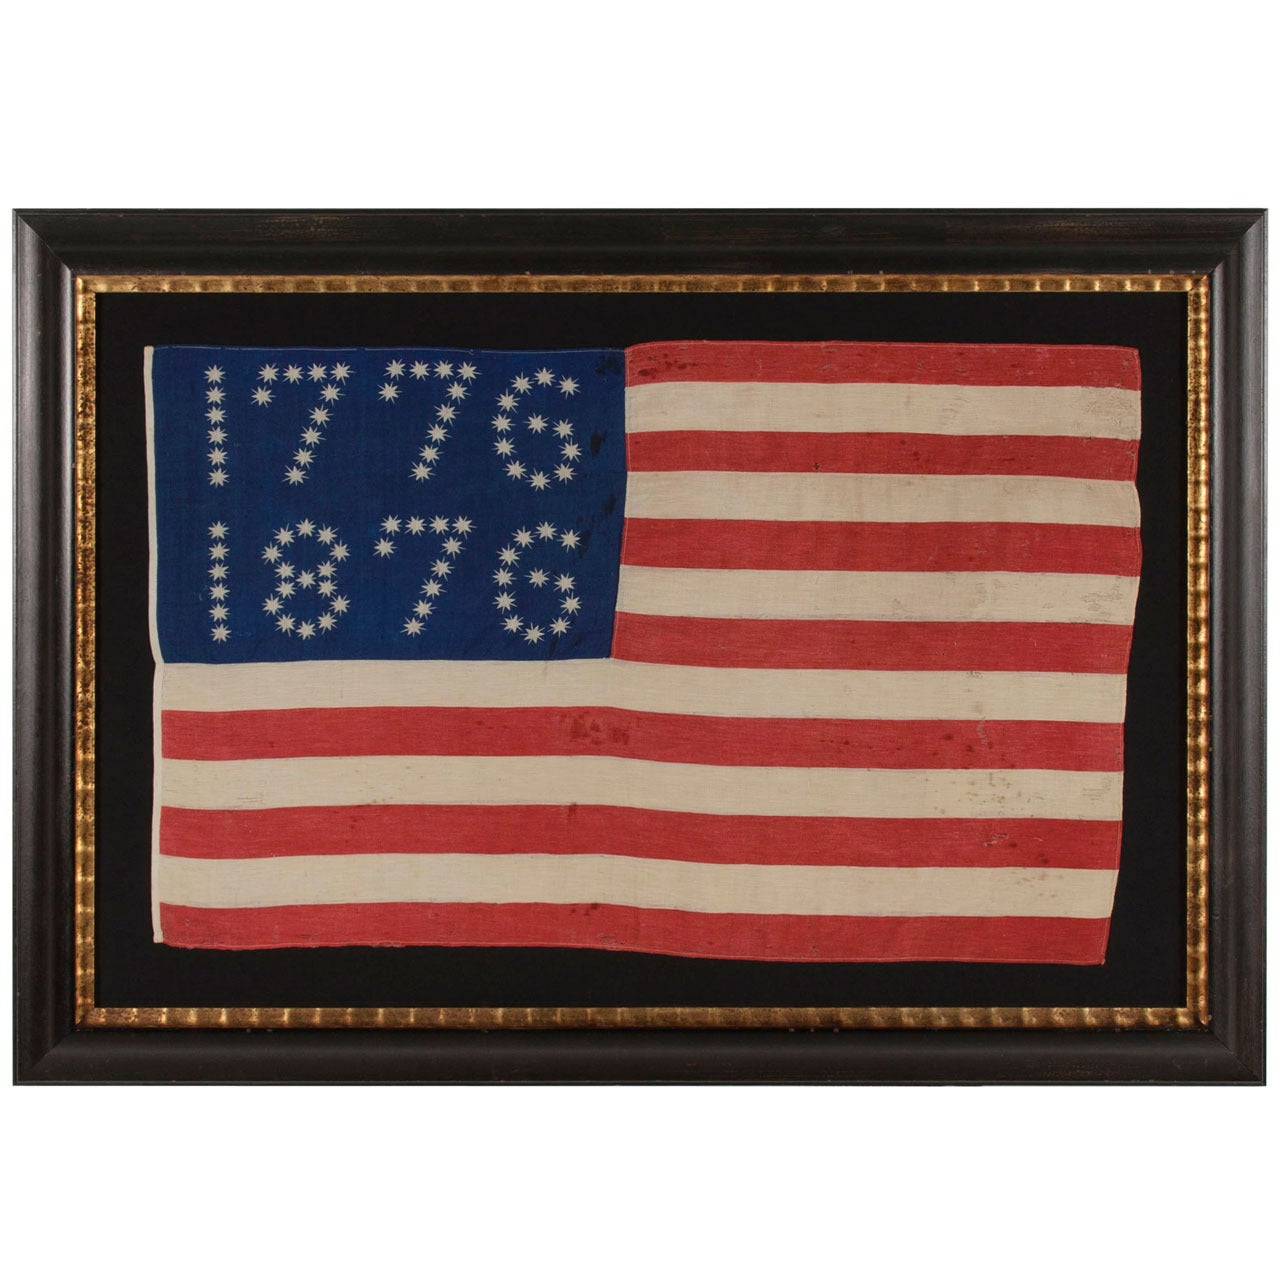 Antiques American Flag with Ten-Pointed Stars That Spell "1776-1876"